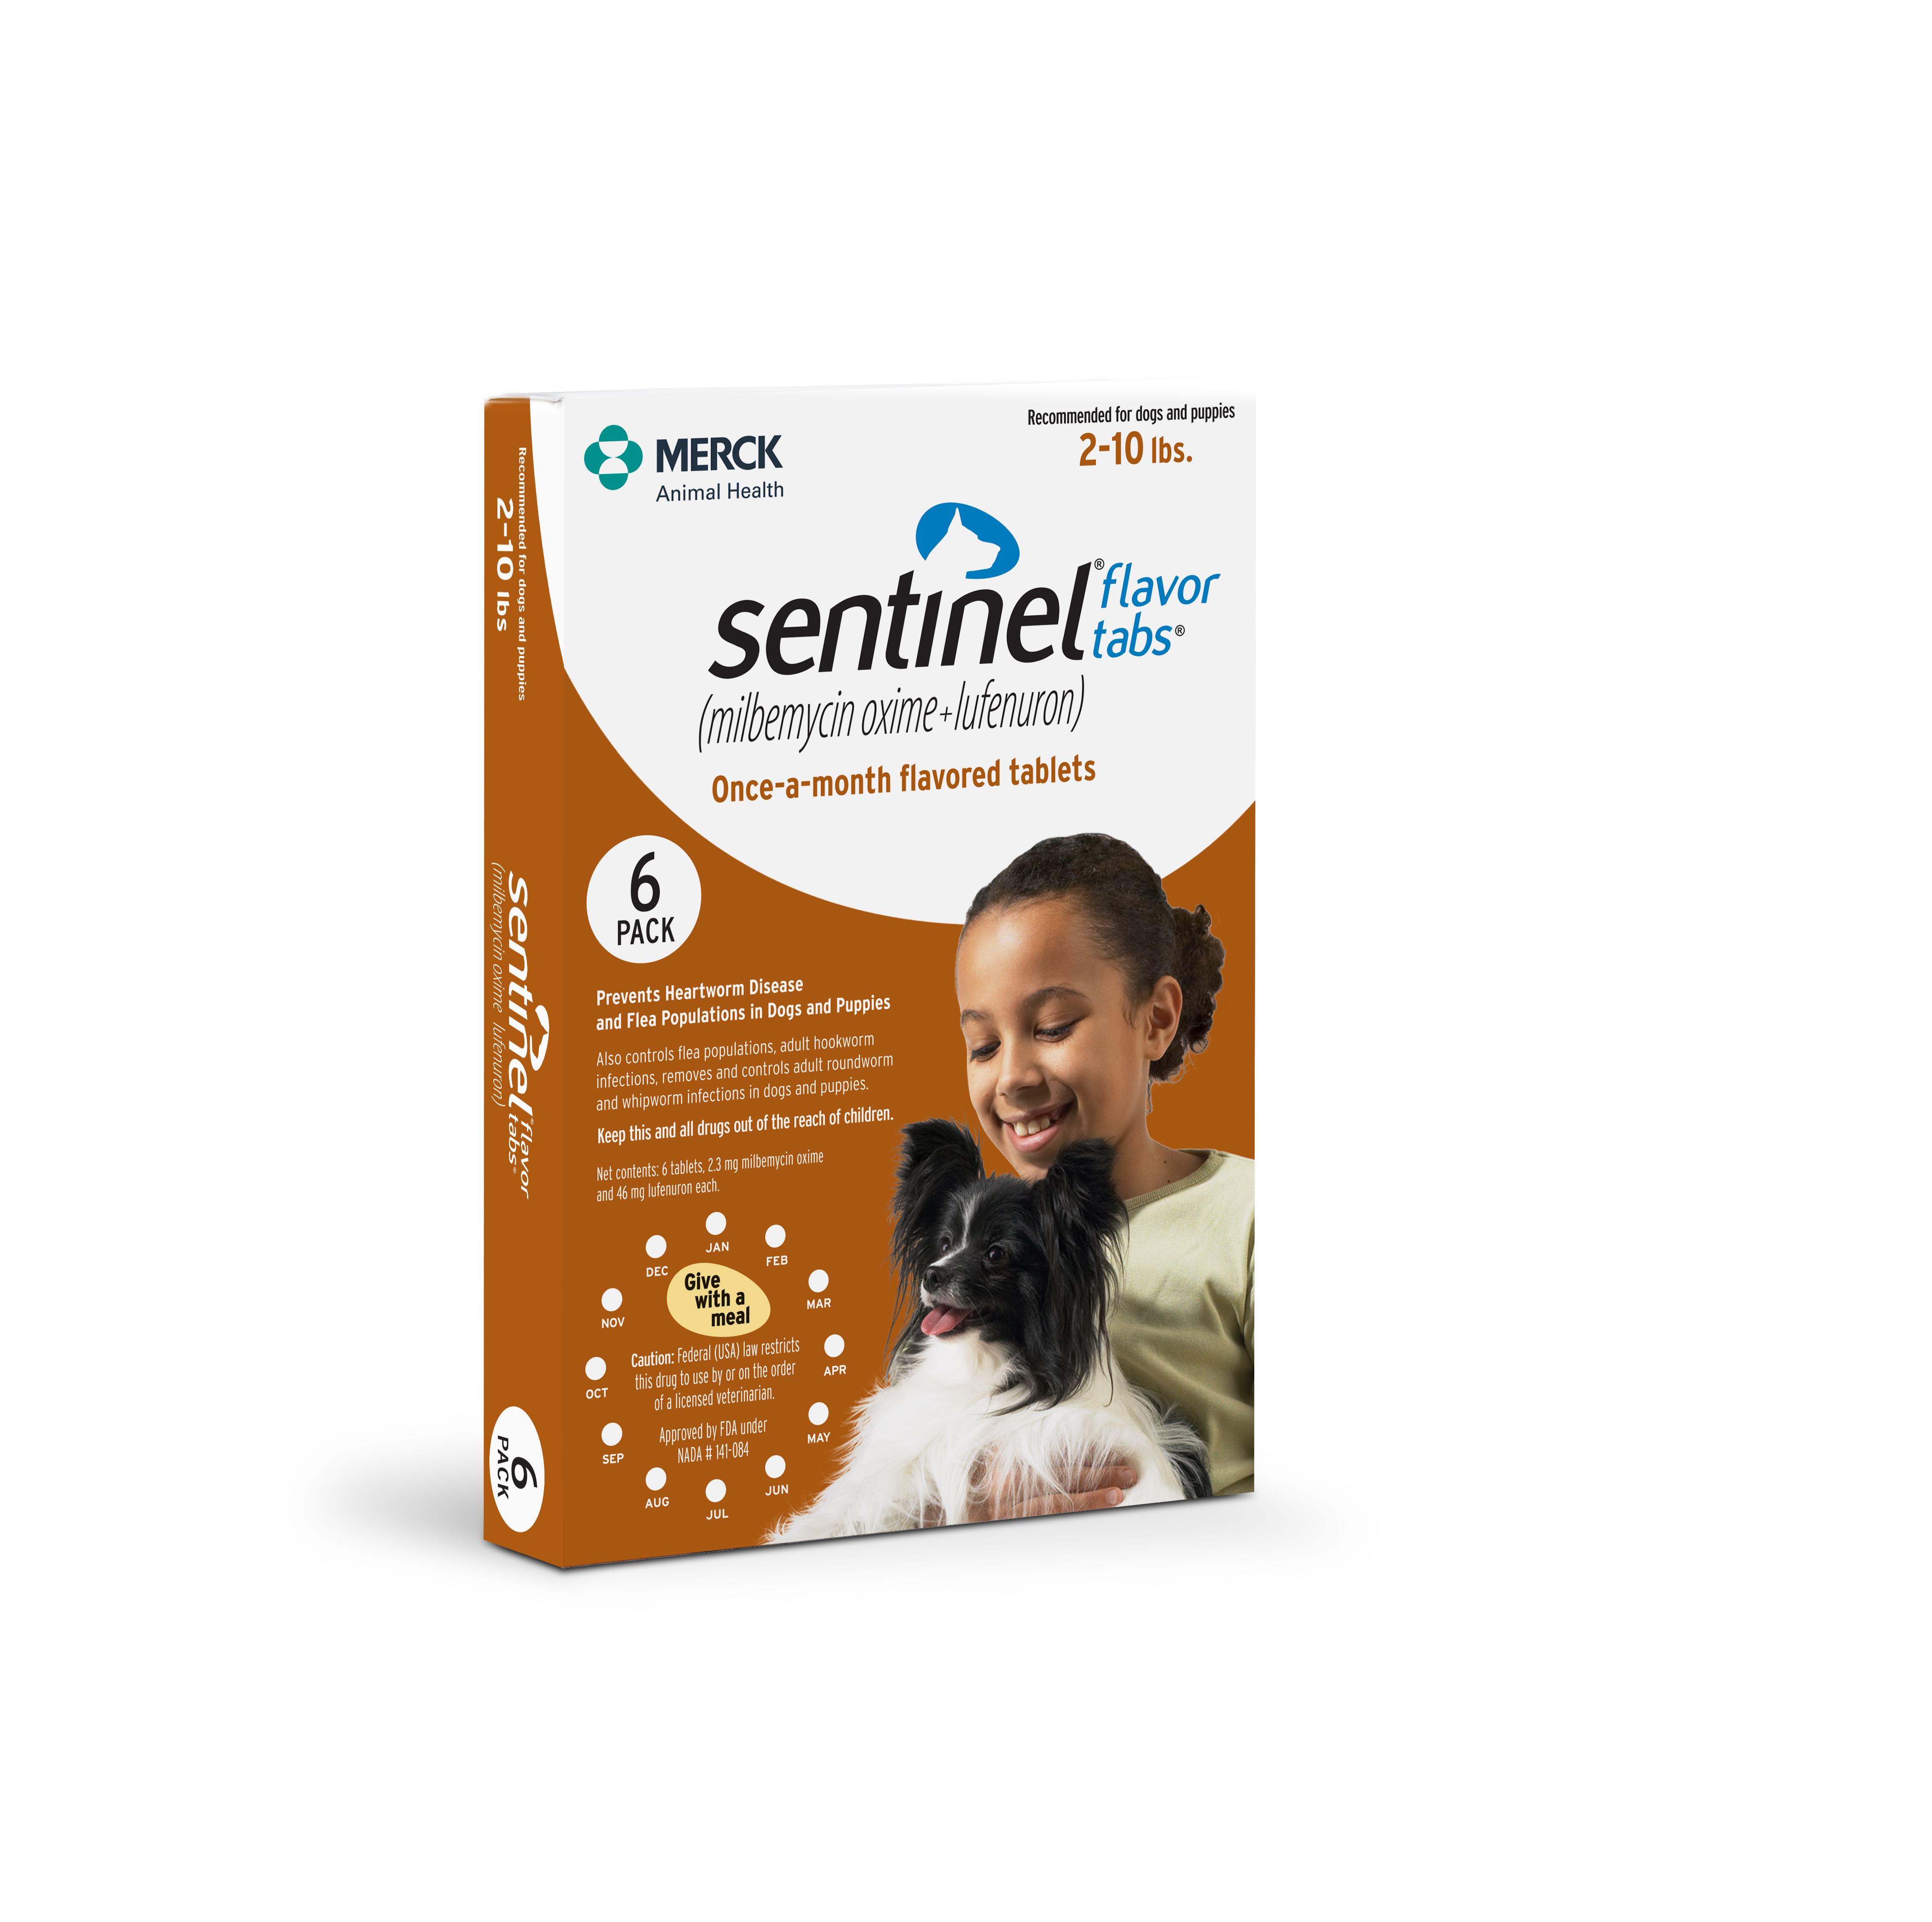 sentinel-tablet-for-dogs-11-25-lbs-green-box-12-tablets-12-mos